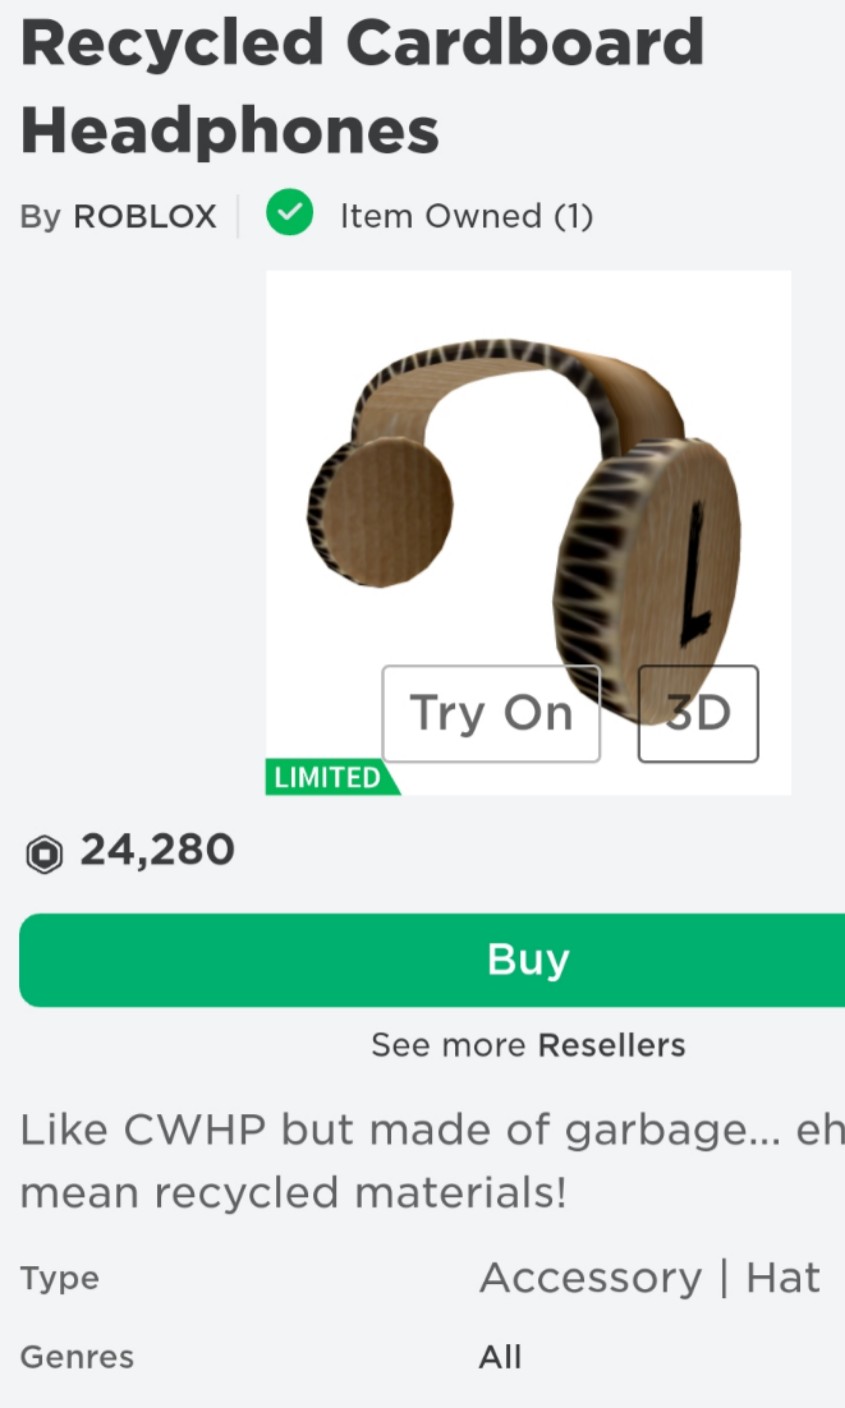 Recycled Cardboard Headphones Roblox Toys Games Video Gaming In Game Products On Carousell - roblox headphones by roblox